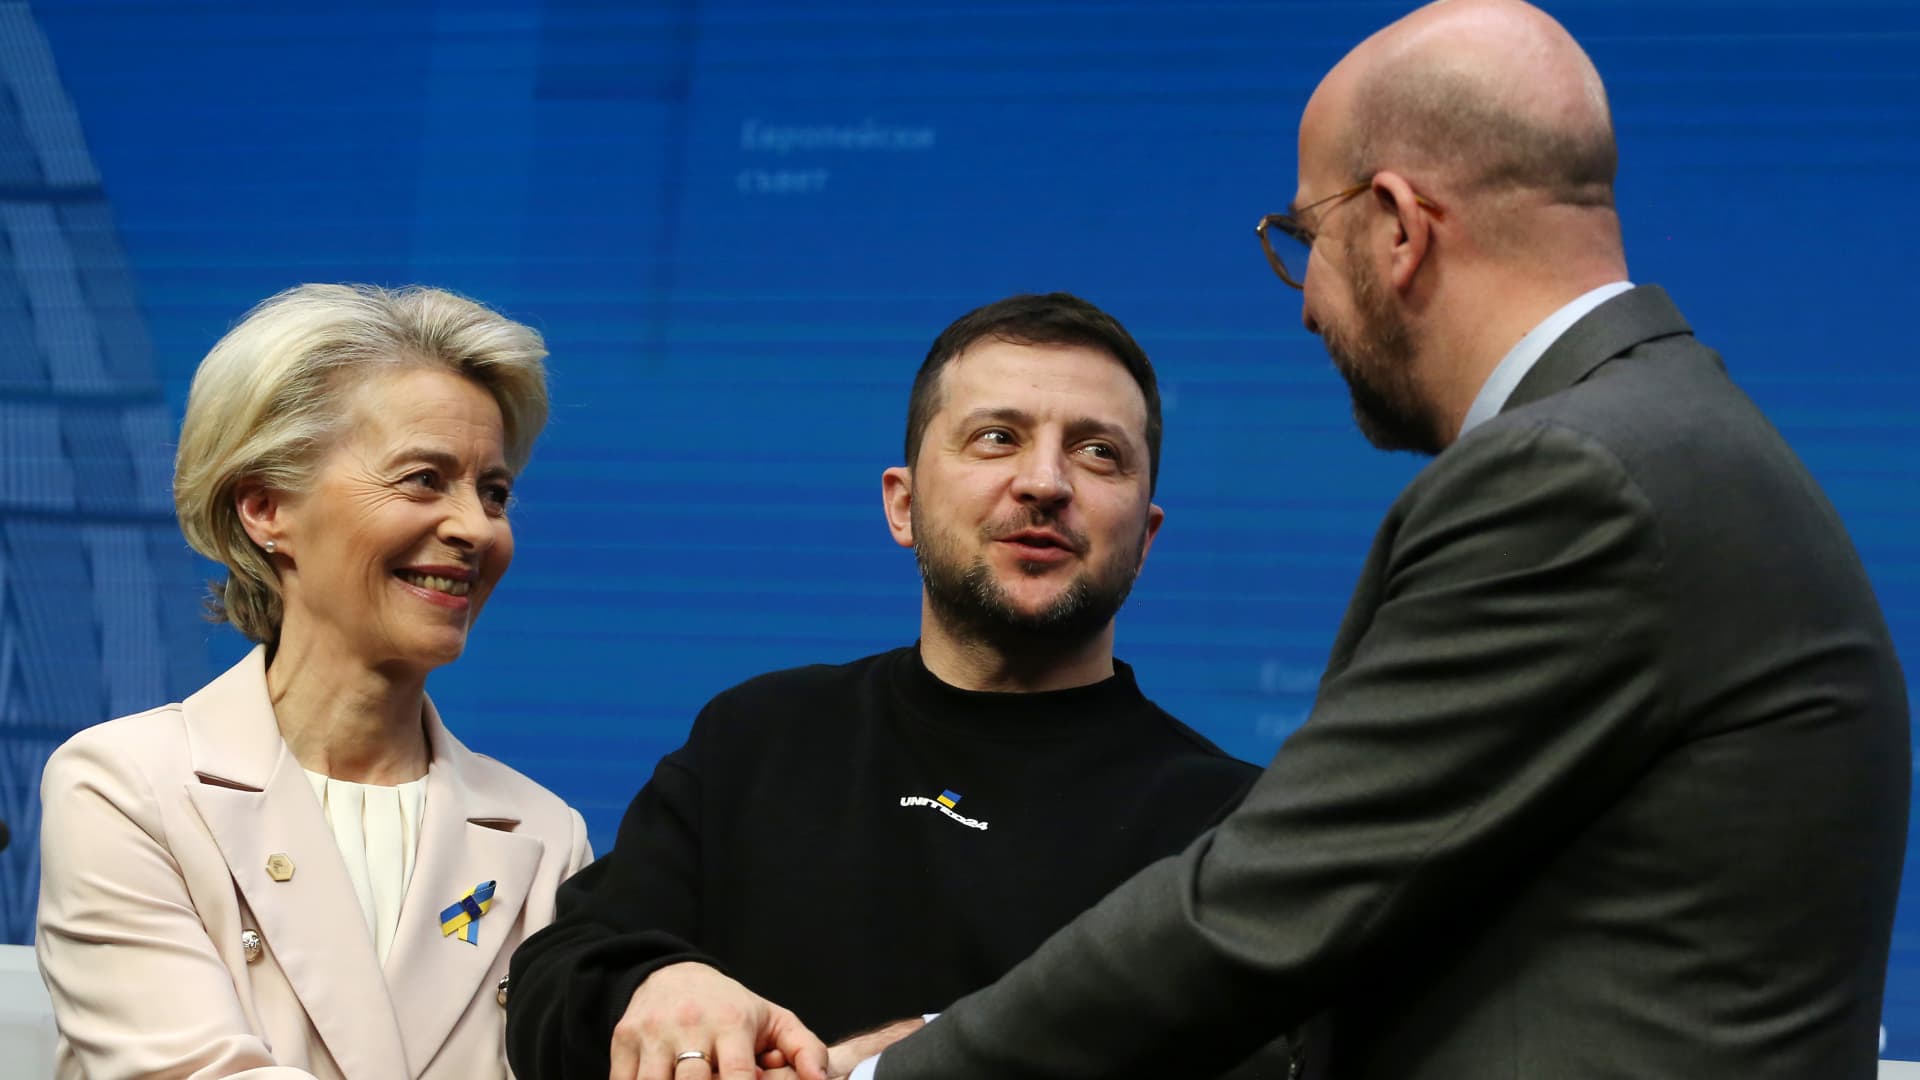 Ursula von der Leyen, president of the European Commission, left, Volodymyr Zelenskiy, Ukraine's president, center, and Charles Michel, president of the European Council, at the end of a news conference following an extraordinary European Union leaders summit at the European Council headquarters in Brussels, Belgium, on Thursday, Feb. 9, 2023.